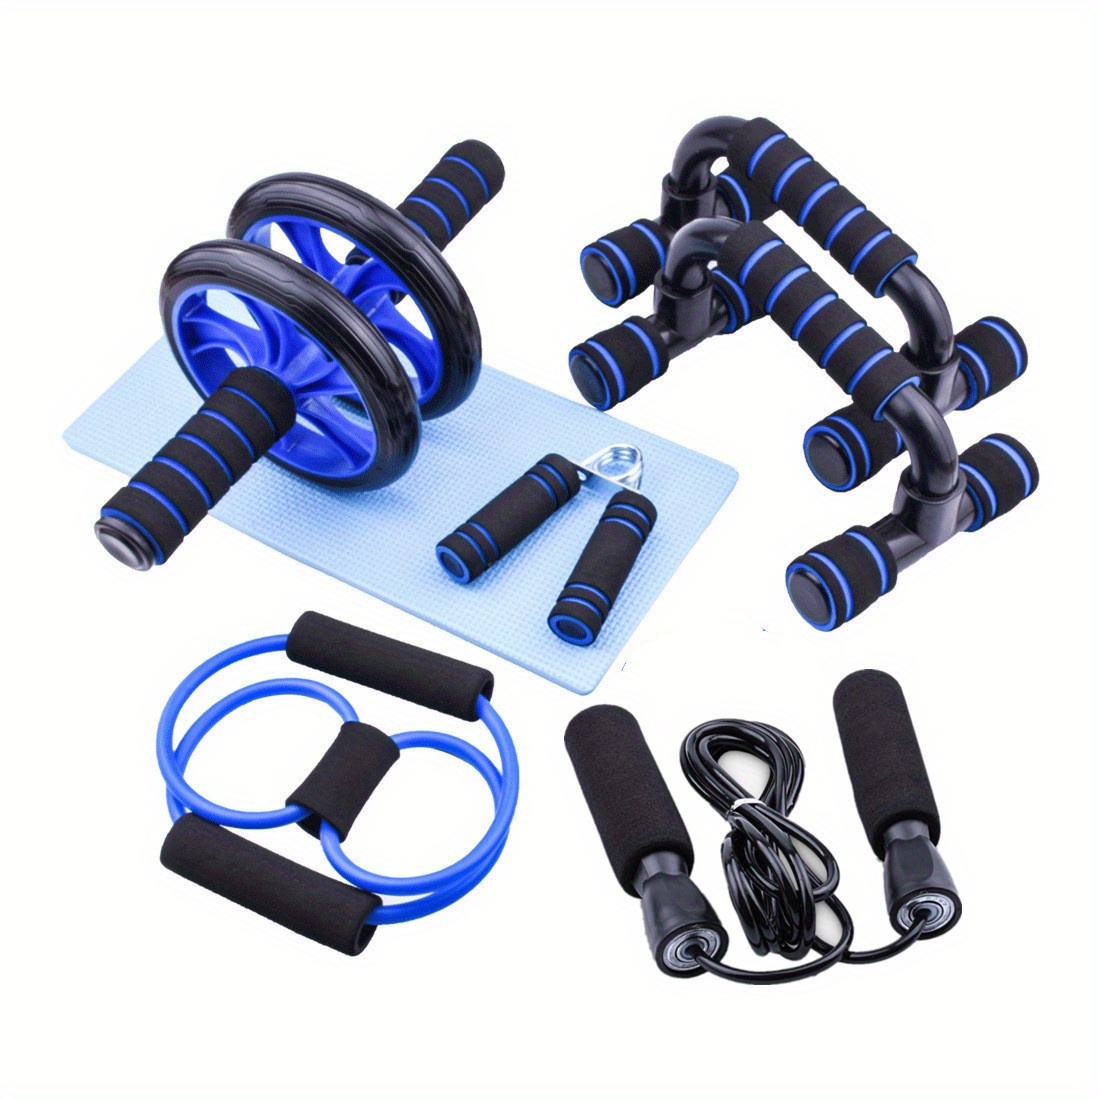 Amonax Gym Equipment for Home Workout (Ab Roller Wheel Set, Skipping Rope,  Push-up Handles). Fitness Exercise, Strength Training Equipment for Abs